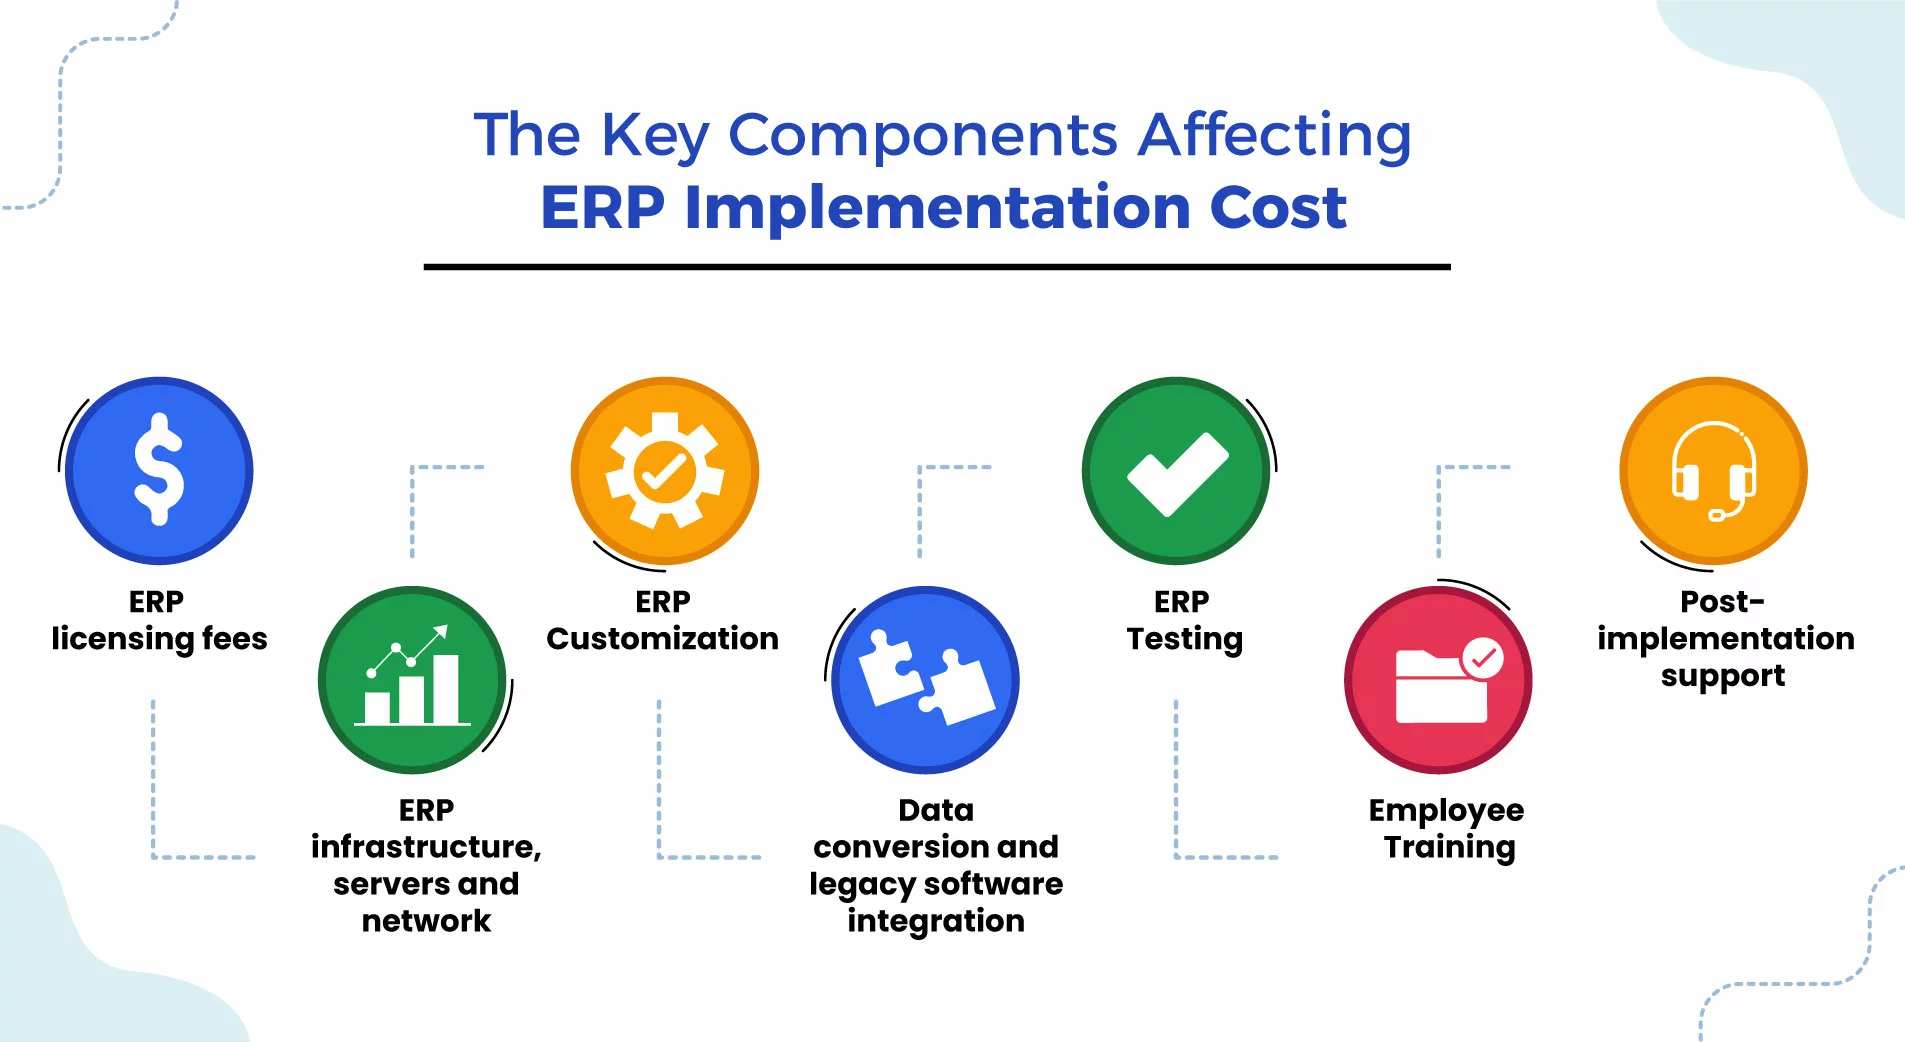 The Key Components Affecting ERP Implementation Cost